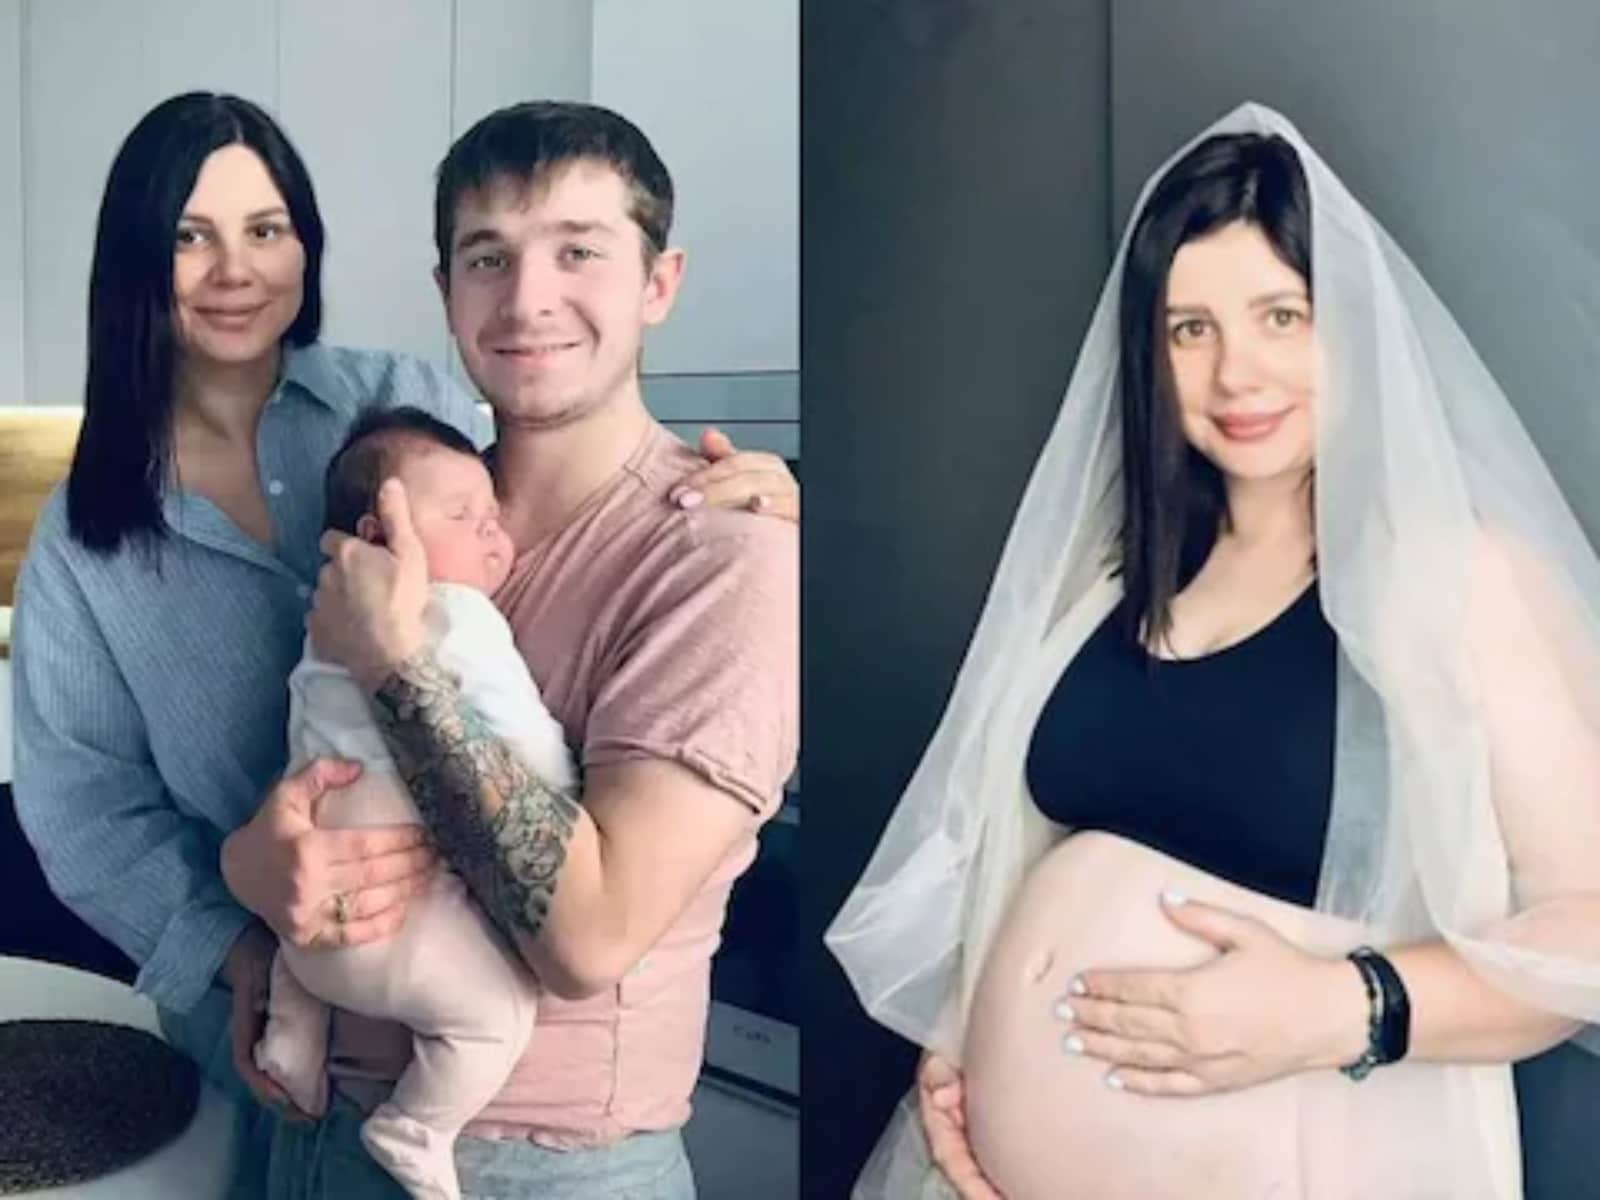 Russian Woman, Married To Stepson, Has A Baby; Expecting Another